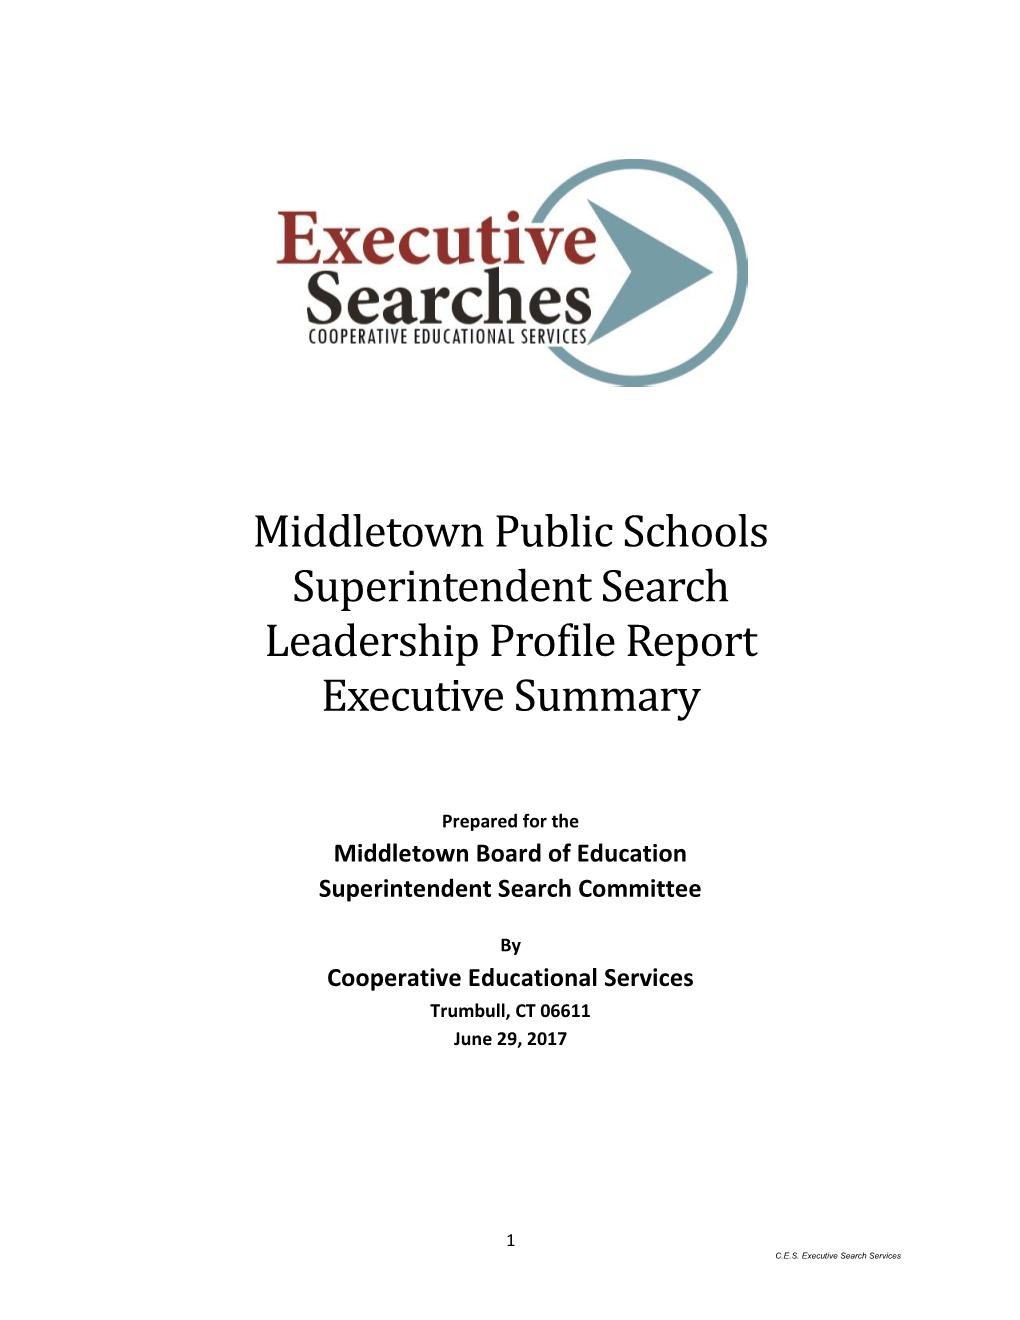 Middletown Public Schools Superintendent Search Leadership Profile Report Executive Summary